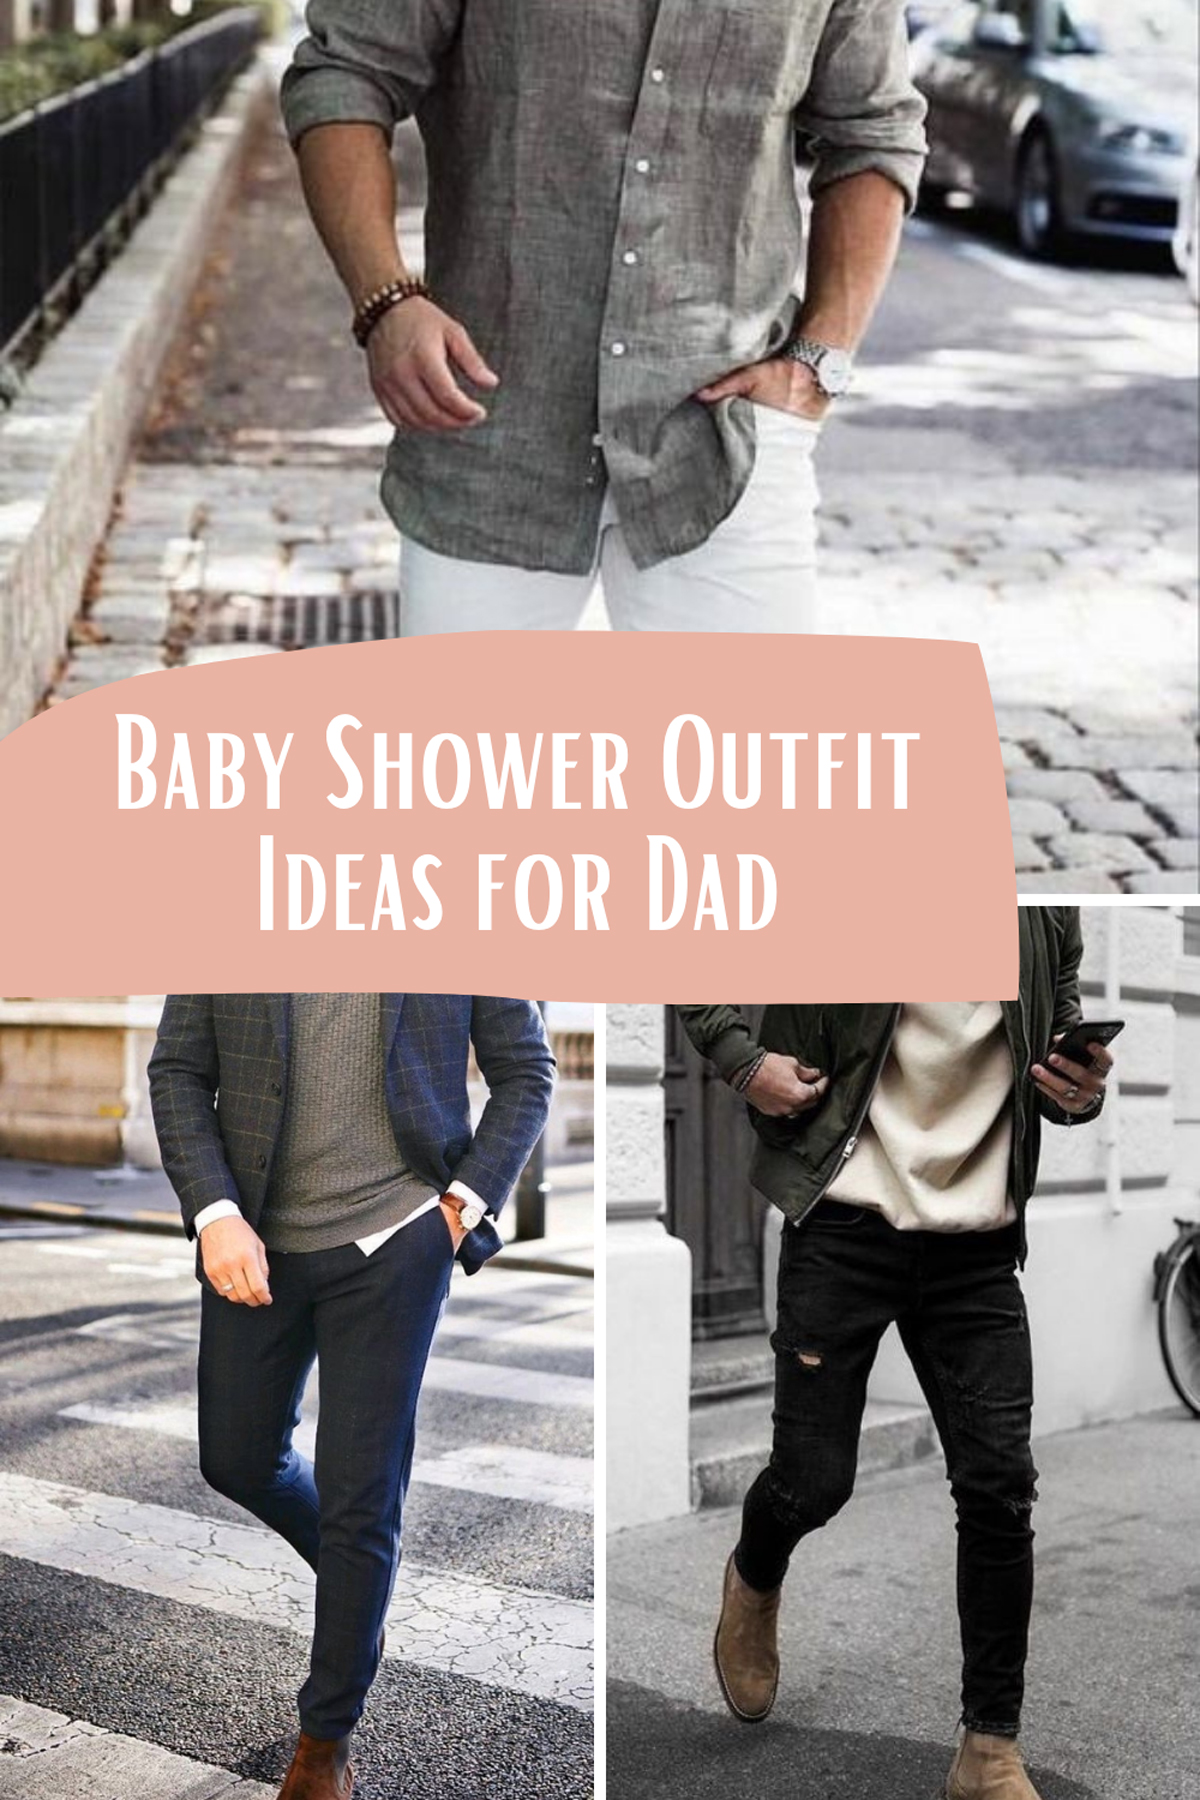 Baby Shower Outfit Ideas for Dad